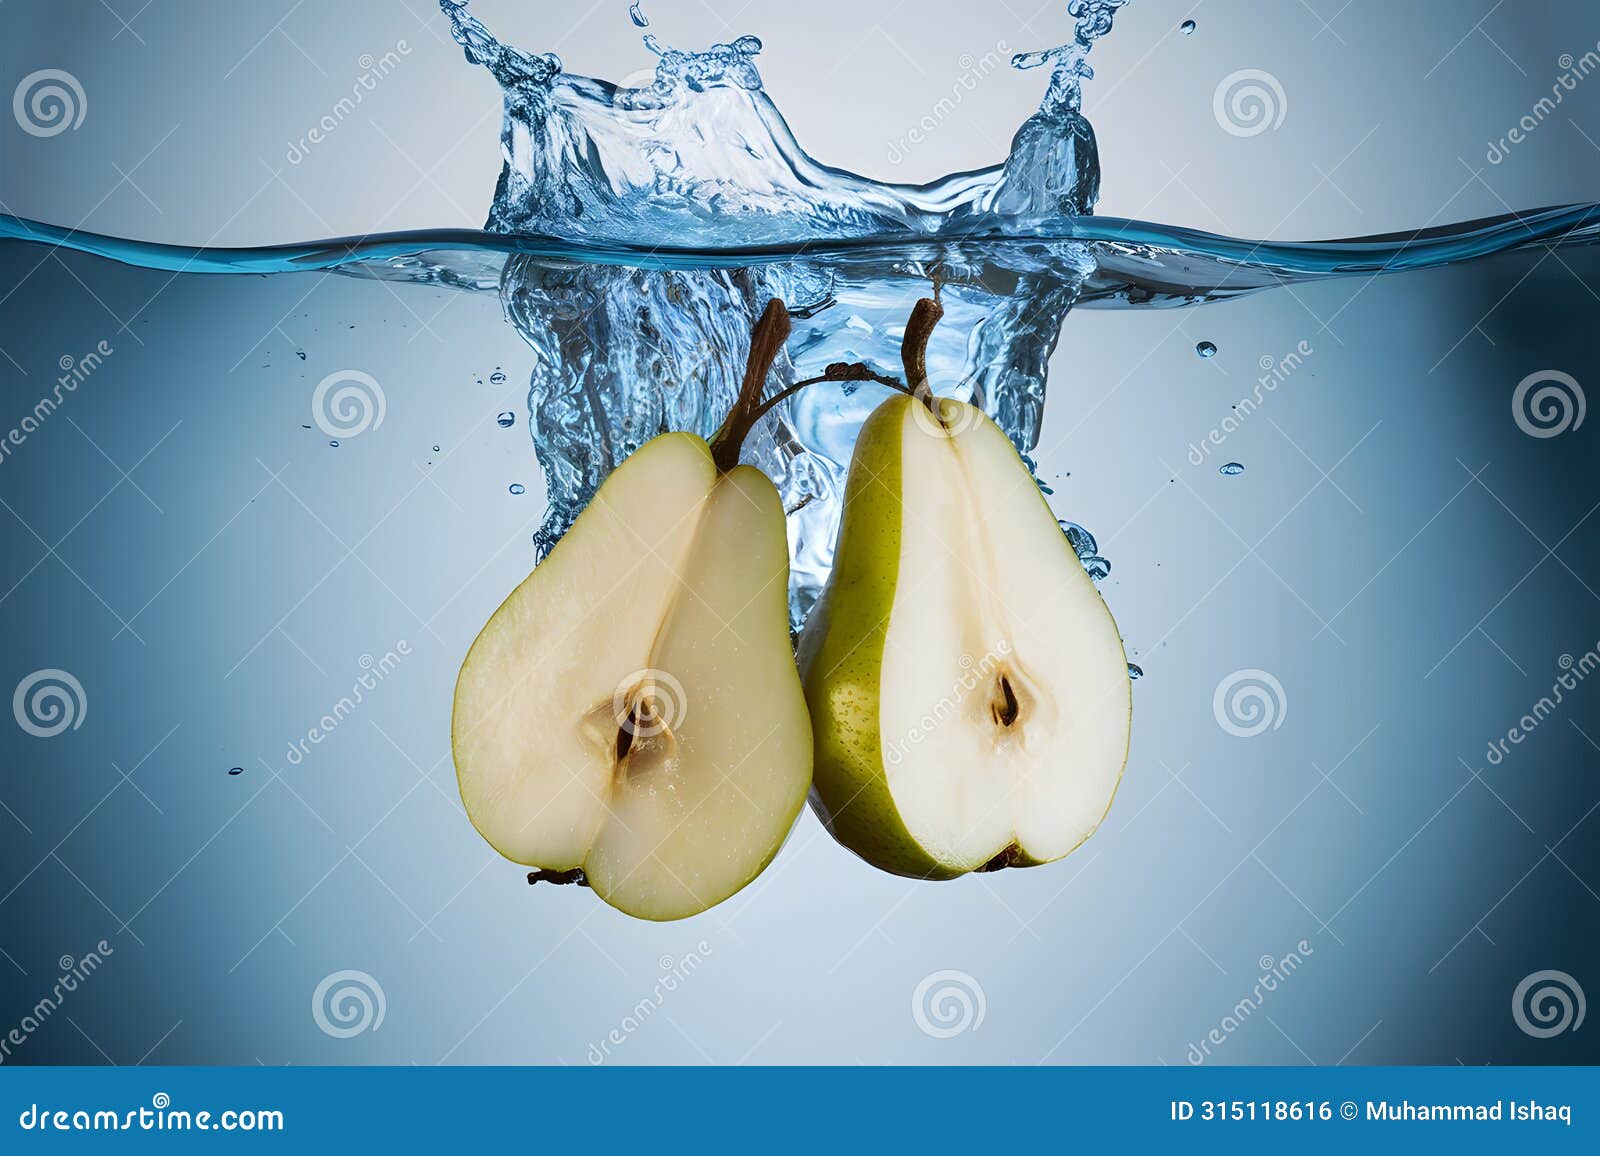 stockphoto water splash featuring sliced pears in an  setting